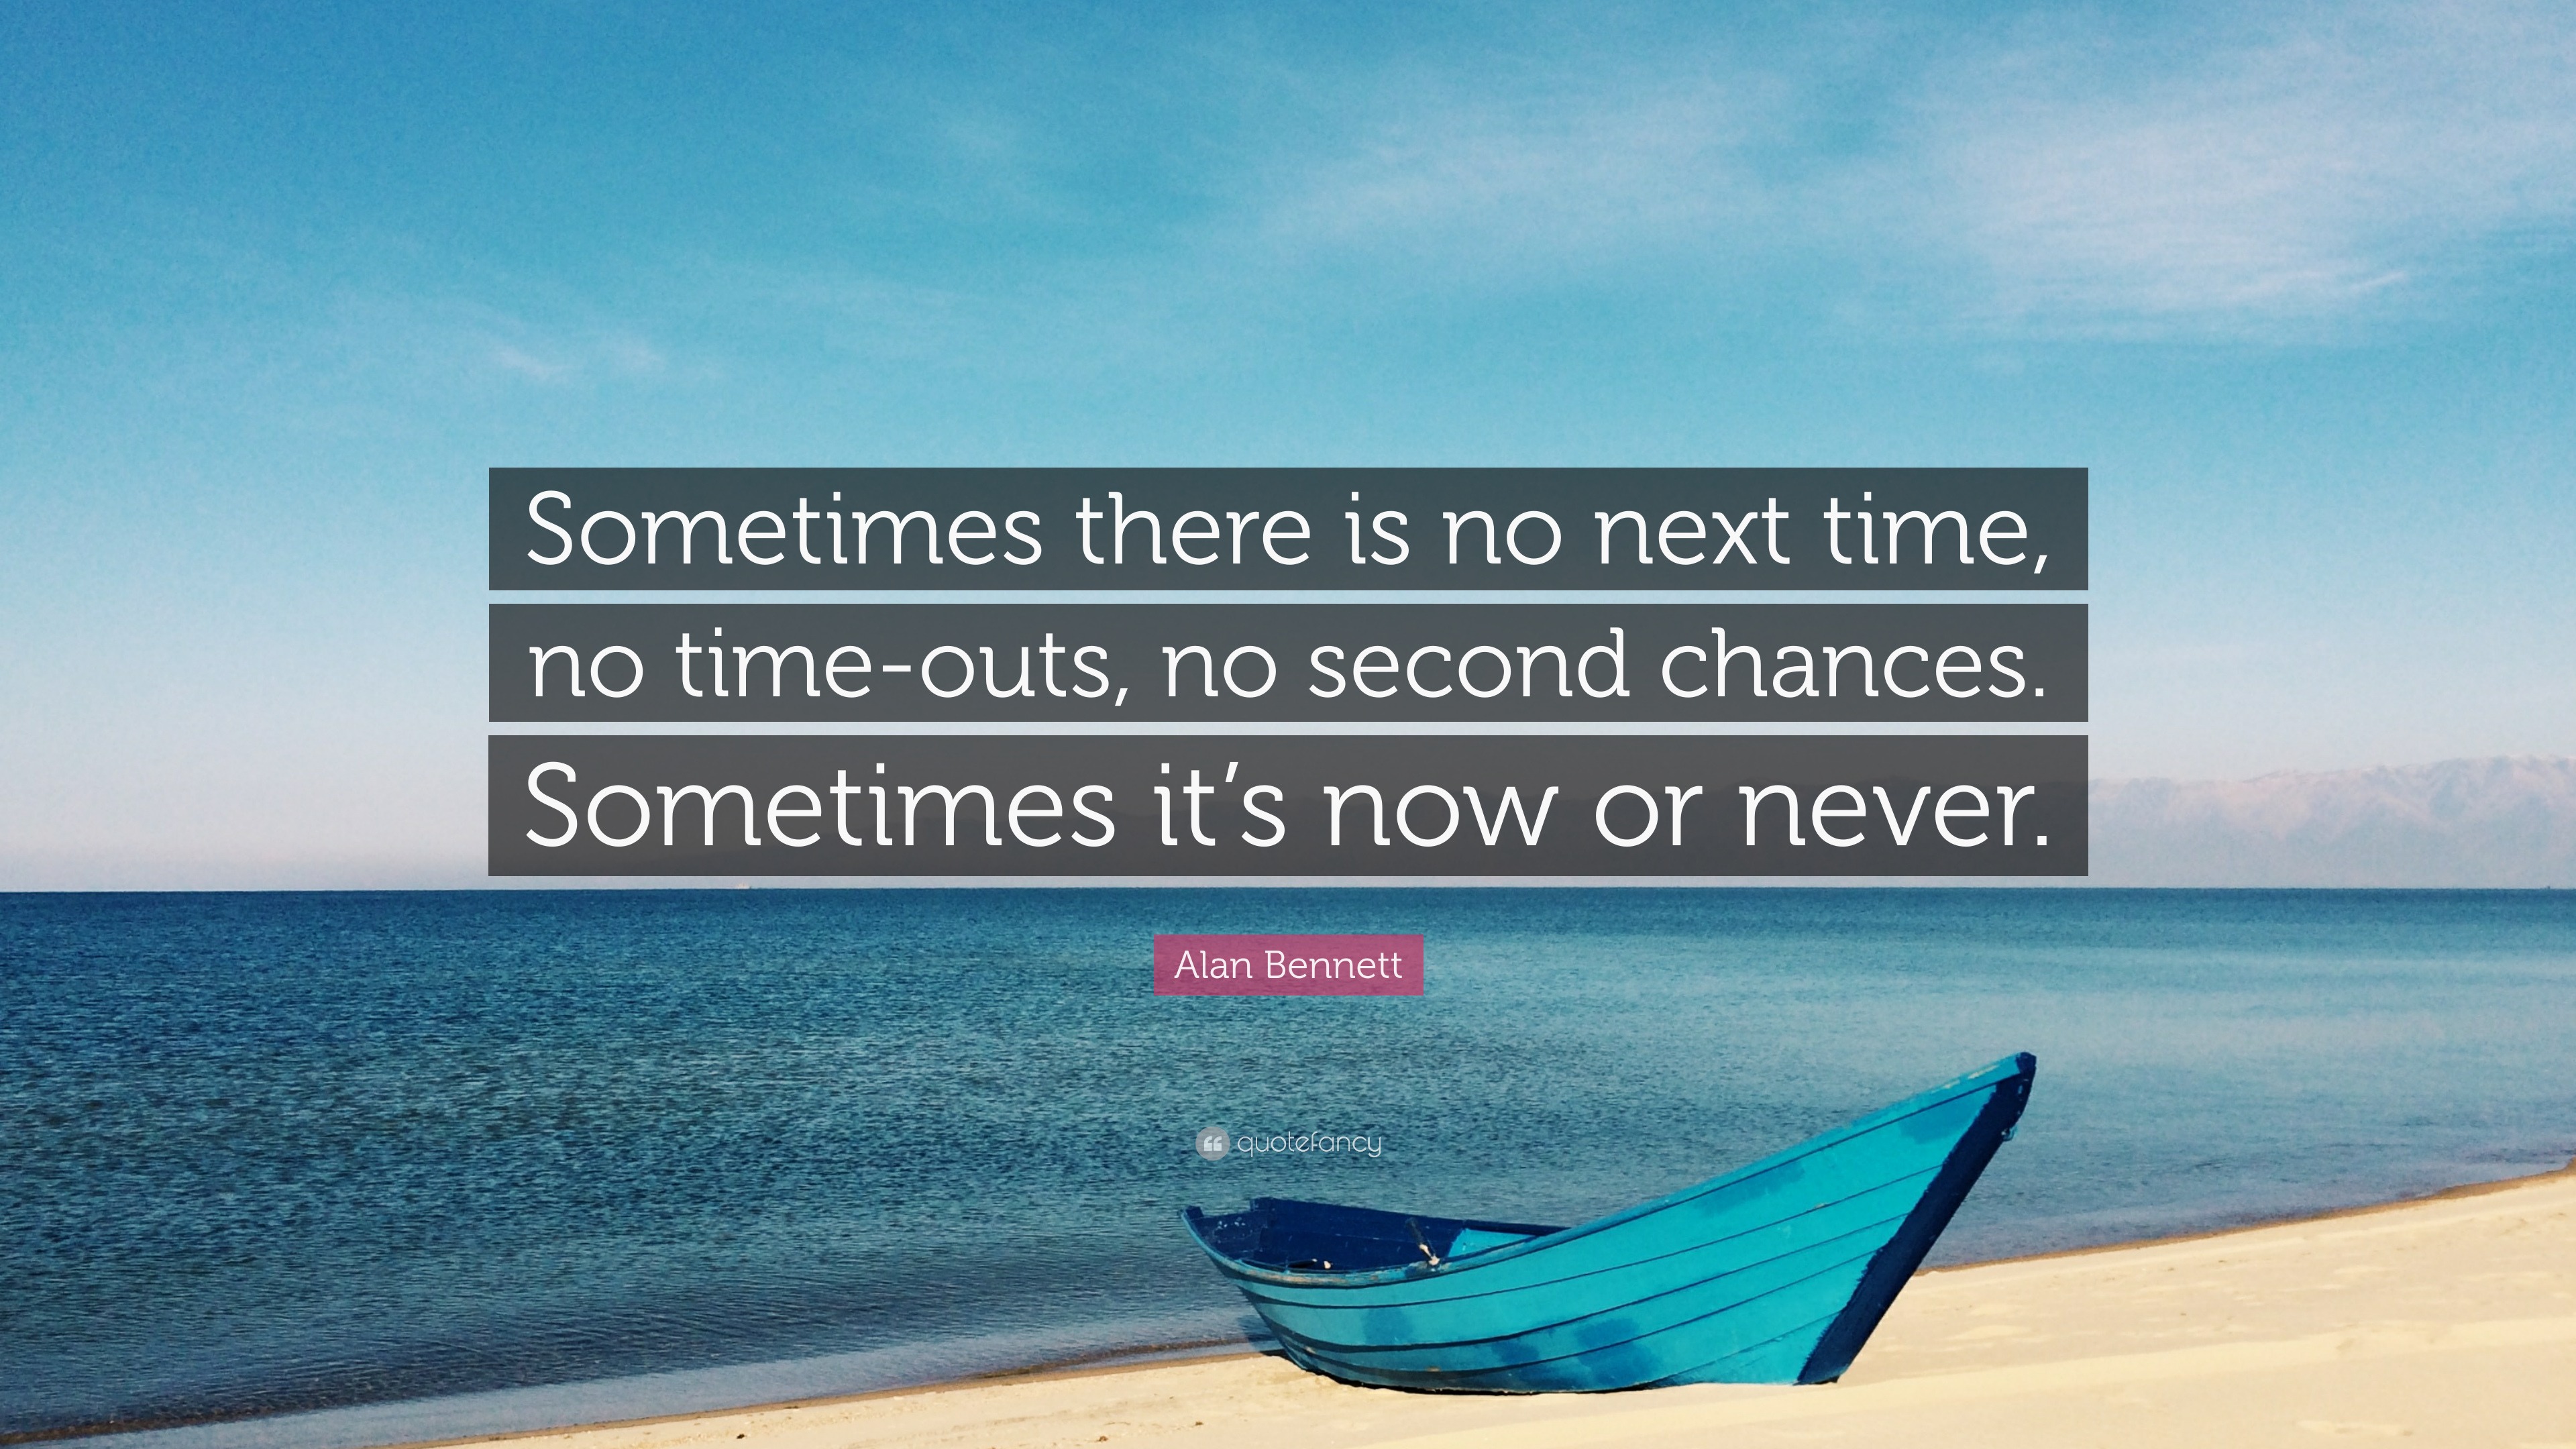 Alan Bennett Quote: “Sometimes there is no next time, no time-outs, no ...